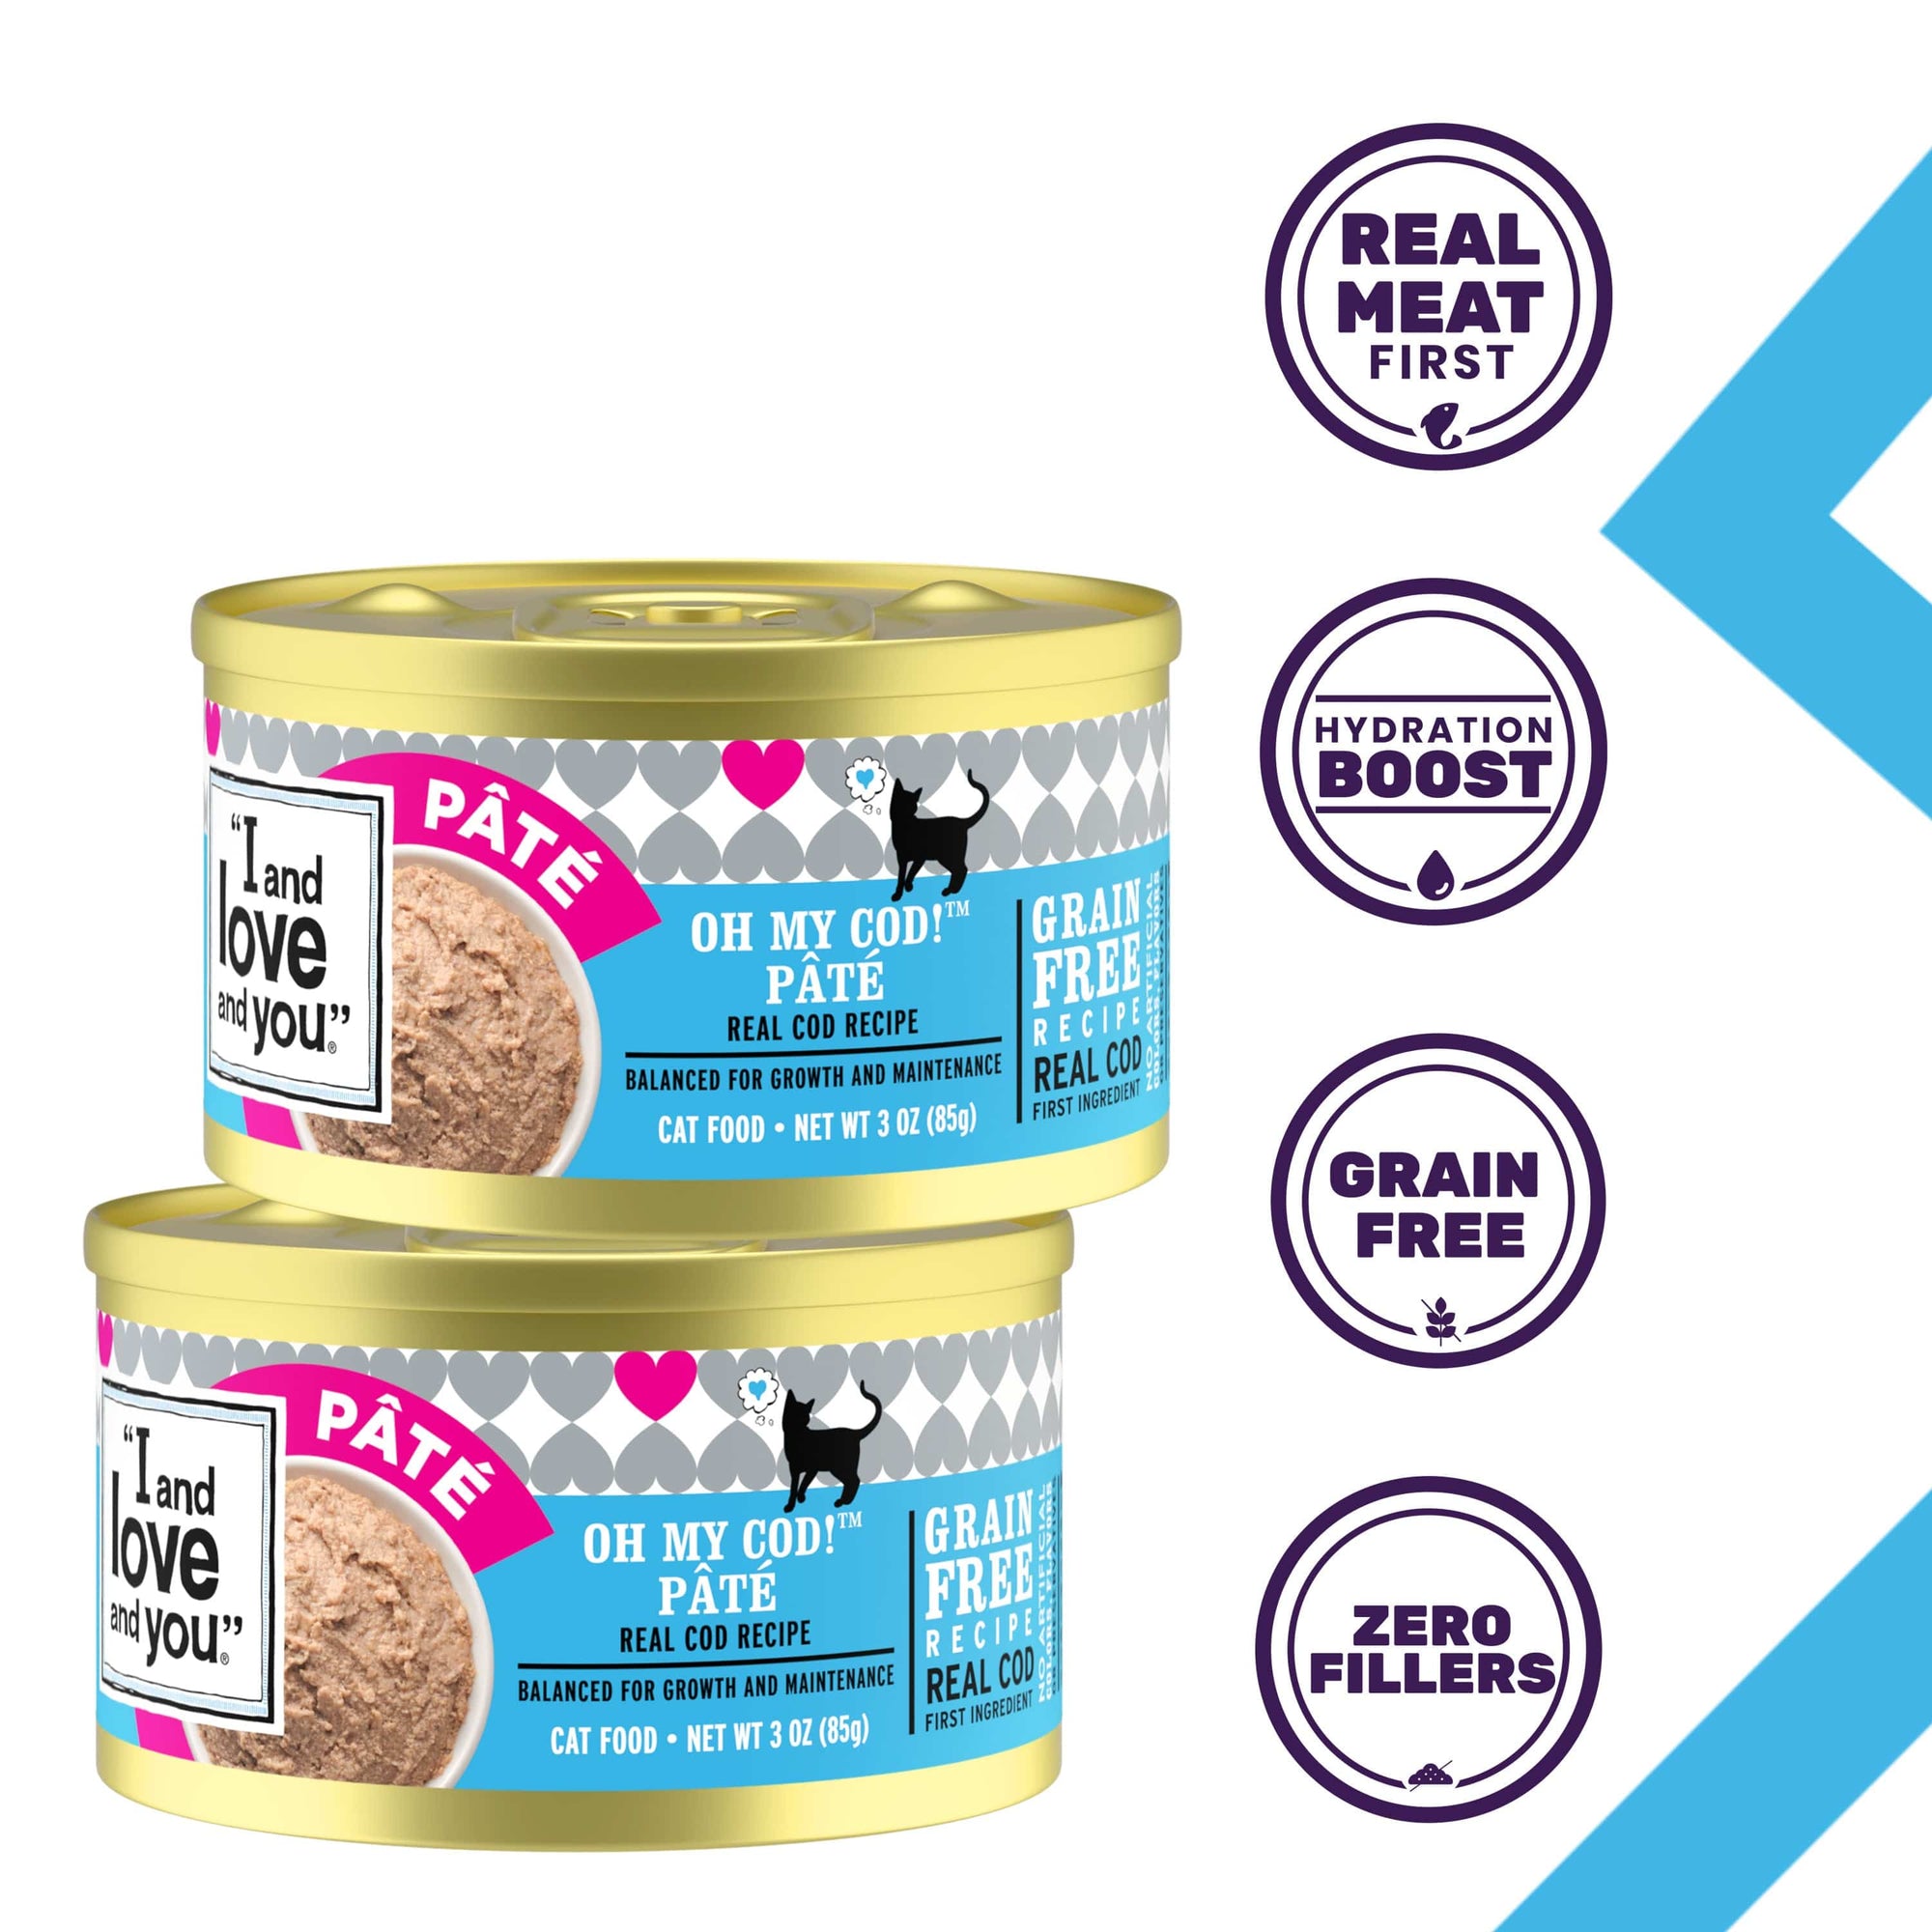 Two cans of Original Recipe - Oh My Cod! Pâté, showcasing product features such as real meat first, hydration boost, grain free and zero fillers.